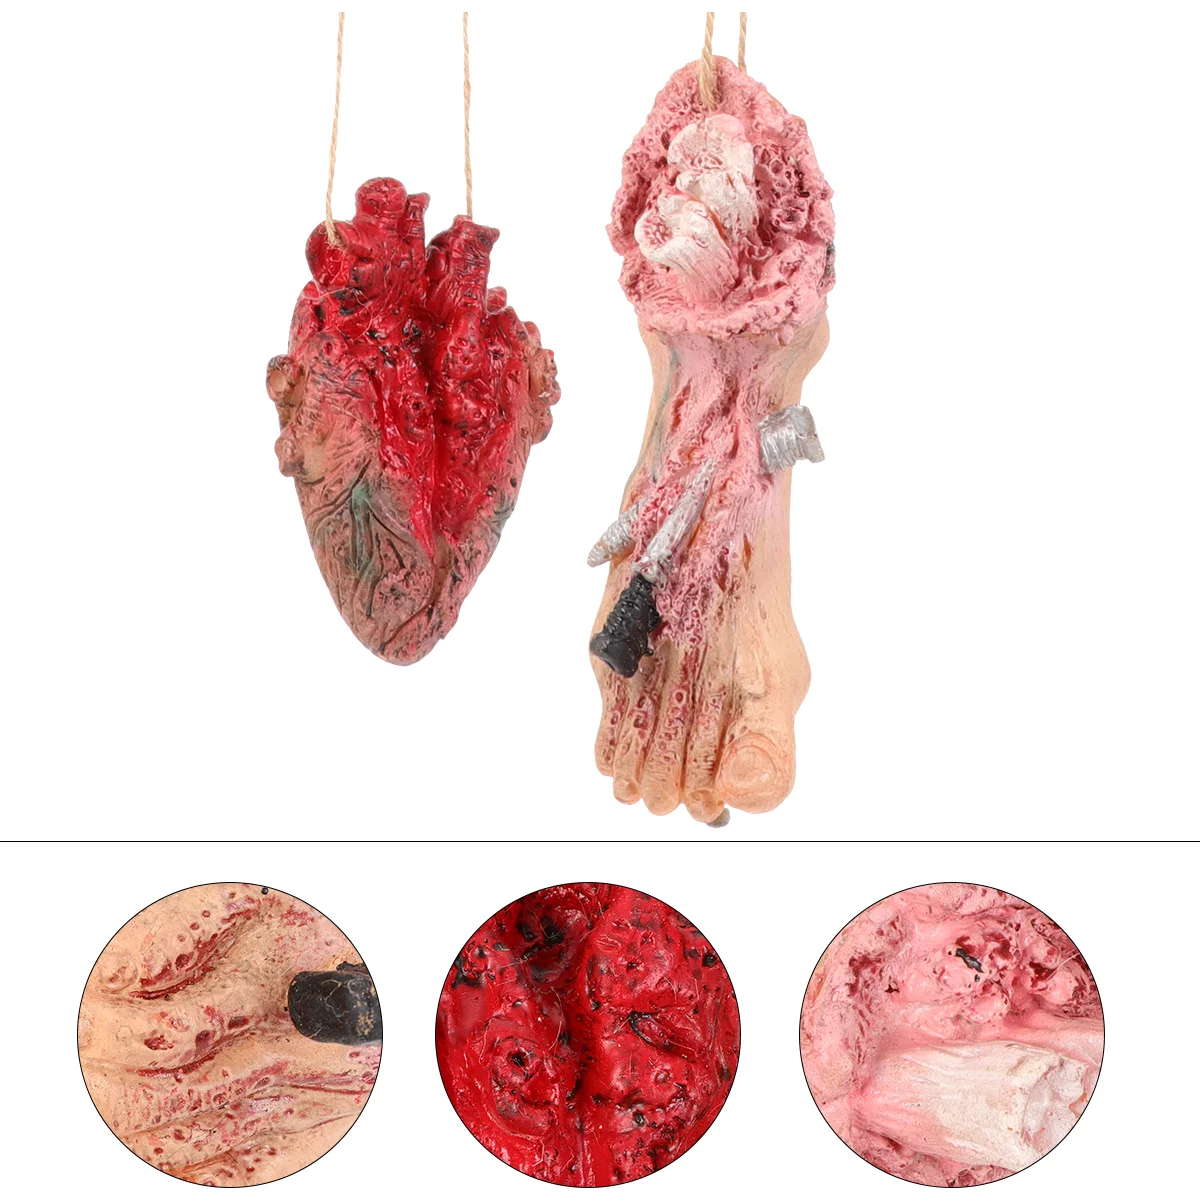 

2 Pcs Outdoor Decor Simulated Human Organ Pendant Halloween Scary Decorations Hanging Body Parts Haunted House Props Pendants